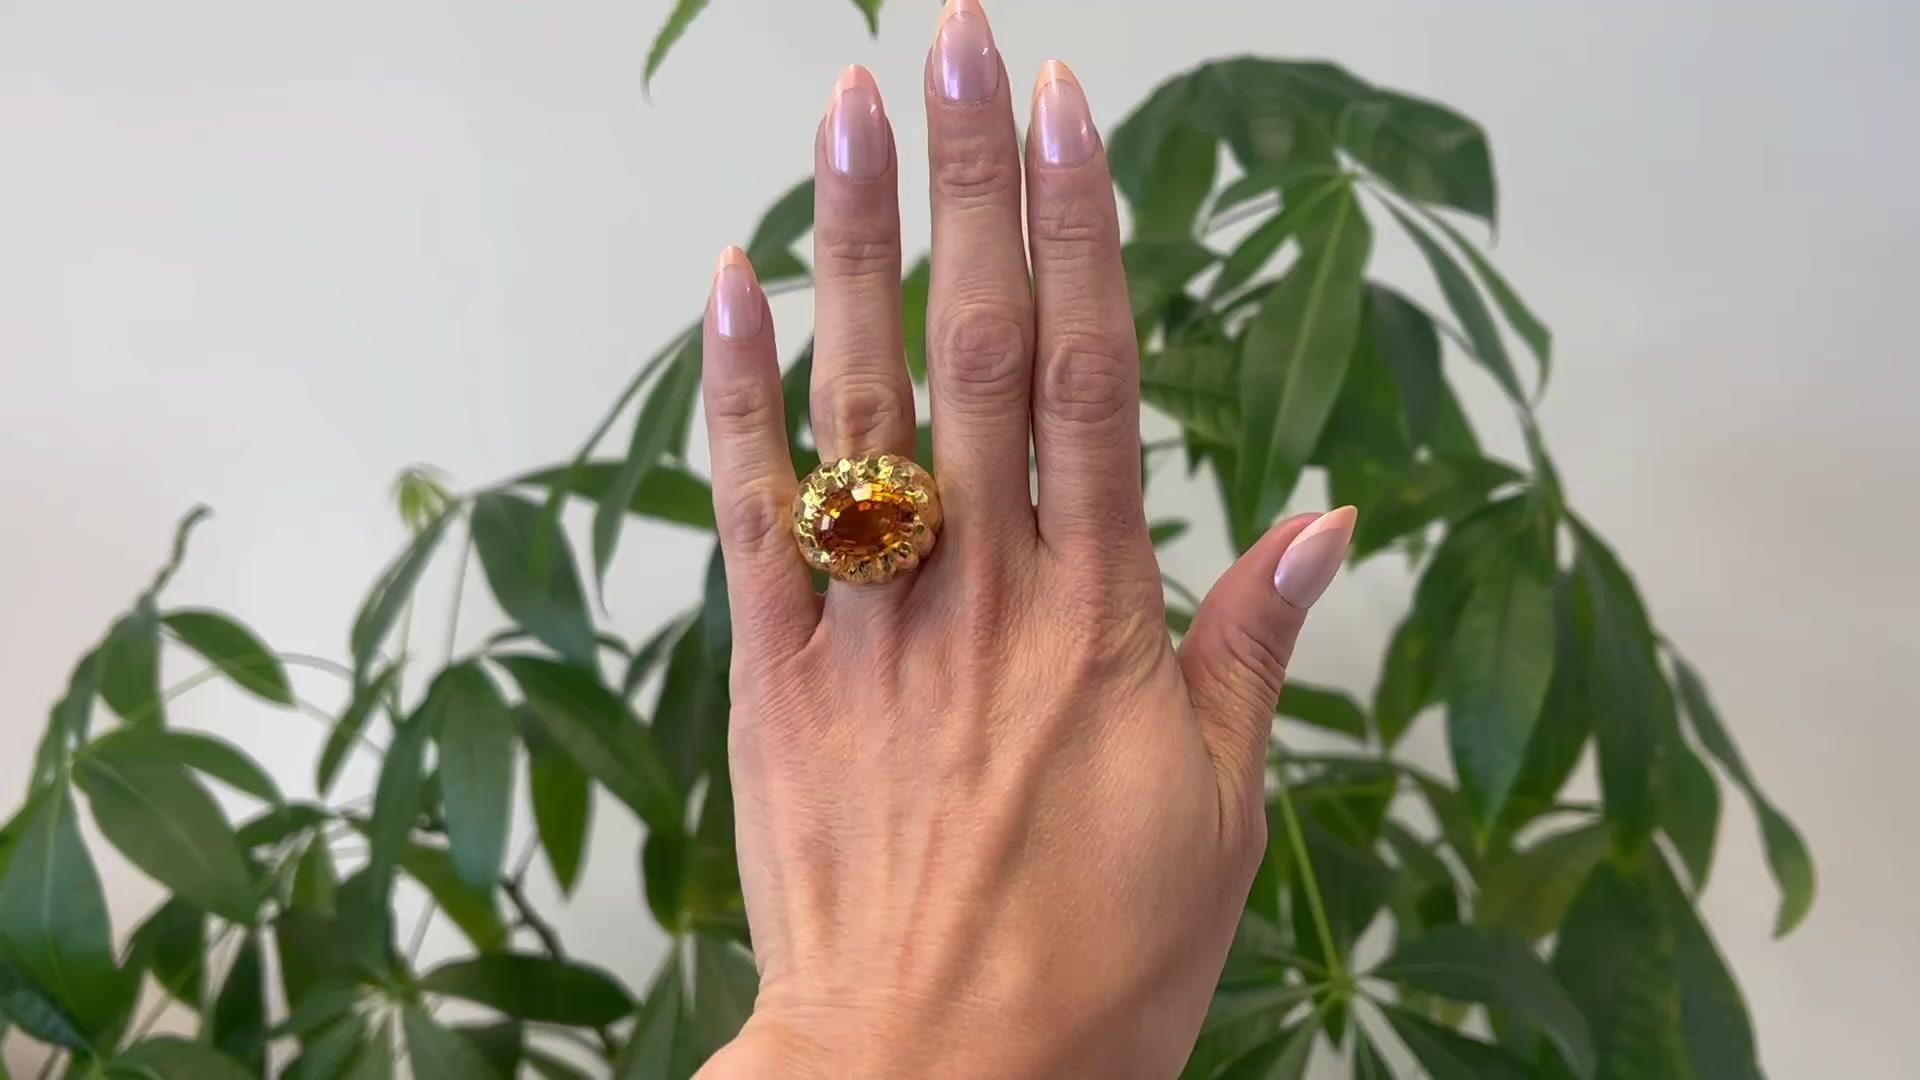 One Vintage David Webb Citrine 18k Yellow Gold Cocktail Ring. Featuring one oval mixed cut golden citrine weighing approximately 10.00 carats. Crafted in 18 karat yellow gold signed Webb with purity marks. Circa 1980. The ring is a size 6 ½ and